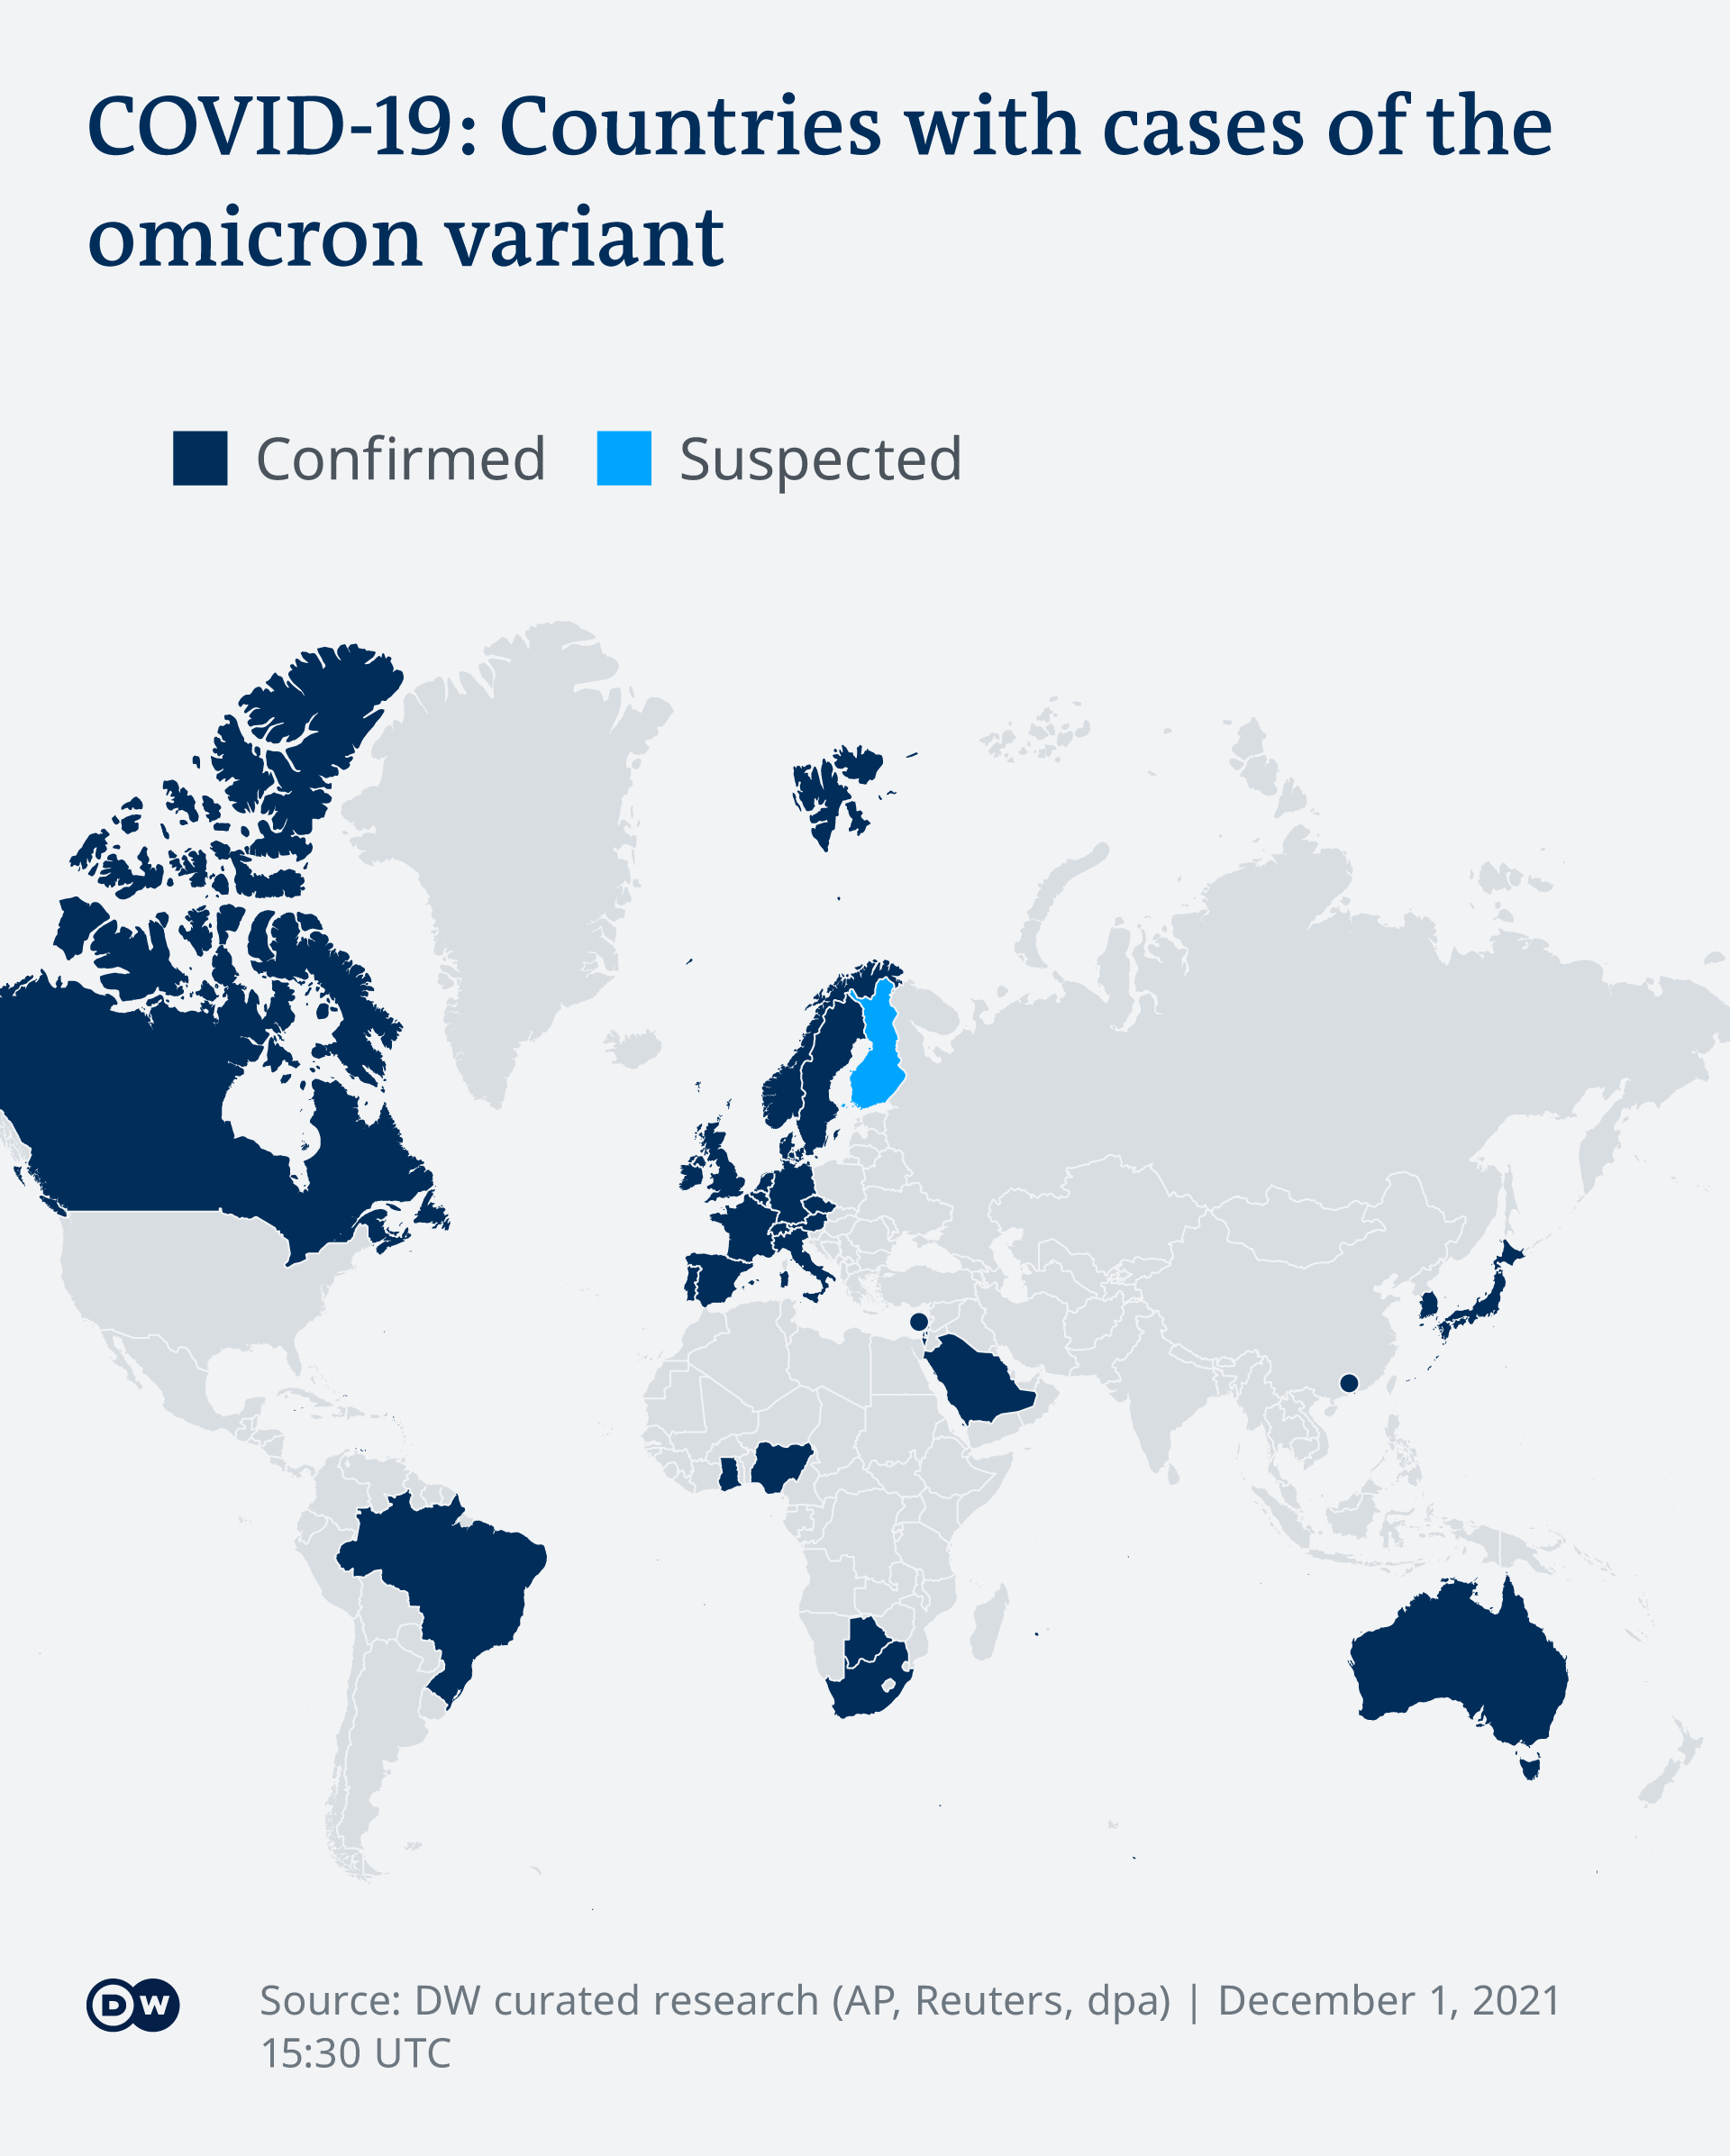 Map of countries with confirmed cases of COVID-19 omicron variant as of 30.11.2021